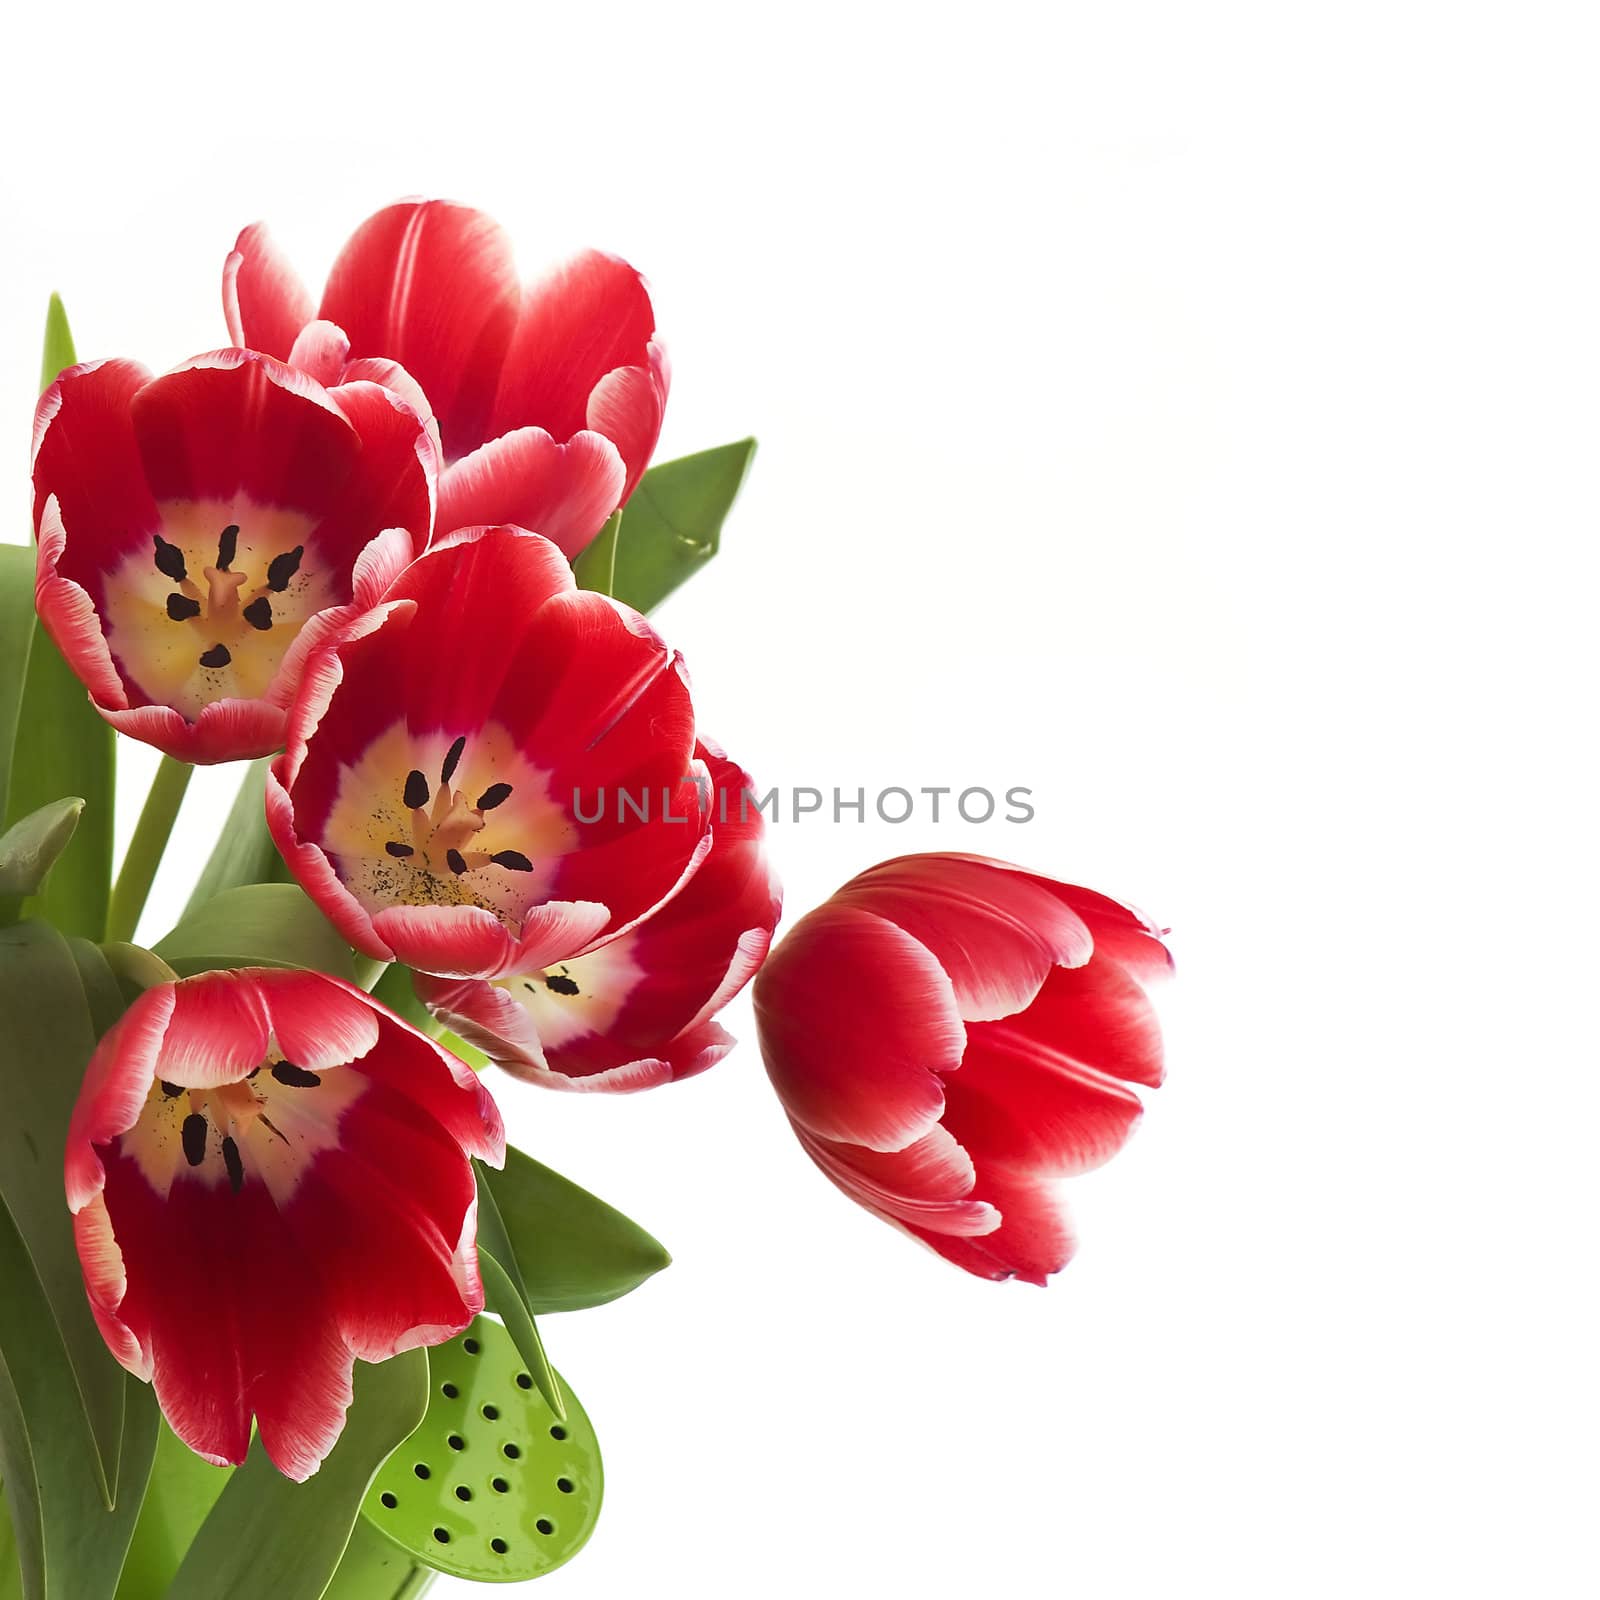 bunch of red tulips isolated on white background by miradrozdowski